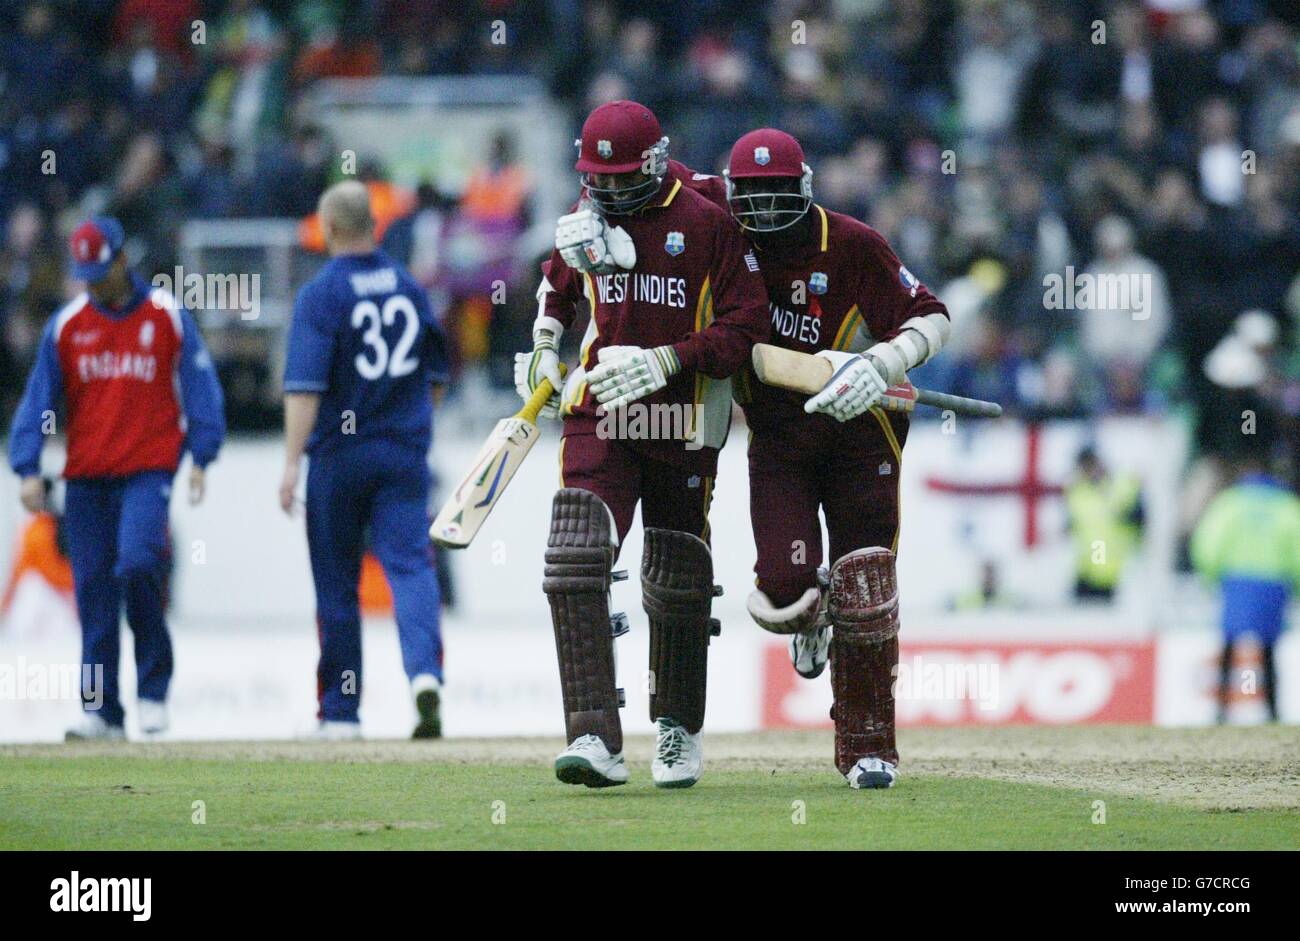 West Indies batsman Ian Bradshaw (left) and Courtney Browne celebrate their two wicket win against England in the ICC Champions Trophy final at the Oval, London, Saturday September 25, 2004. EDITORIAL USE ONLY. NO MOBILE PHONE USE. Stock Photo